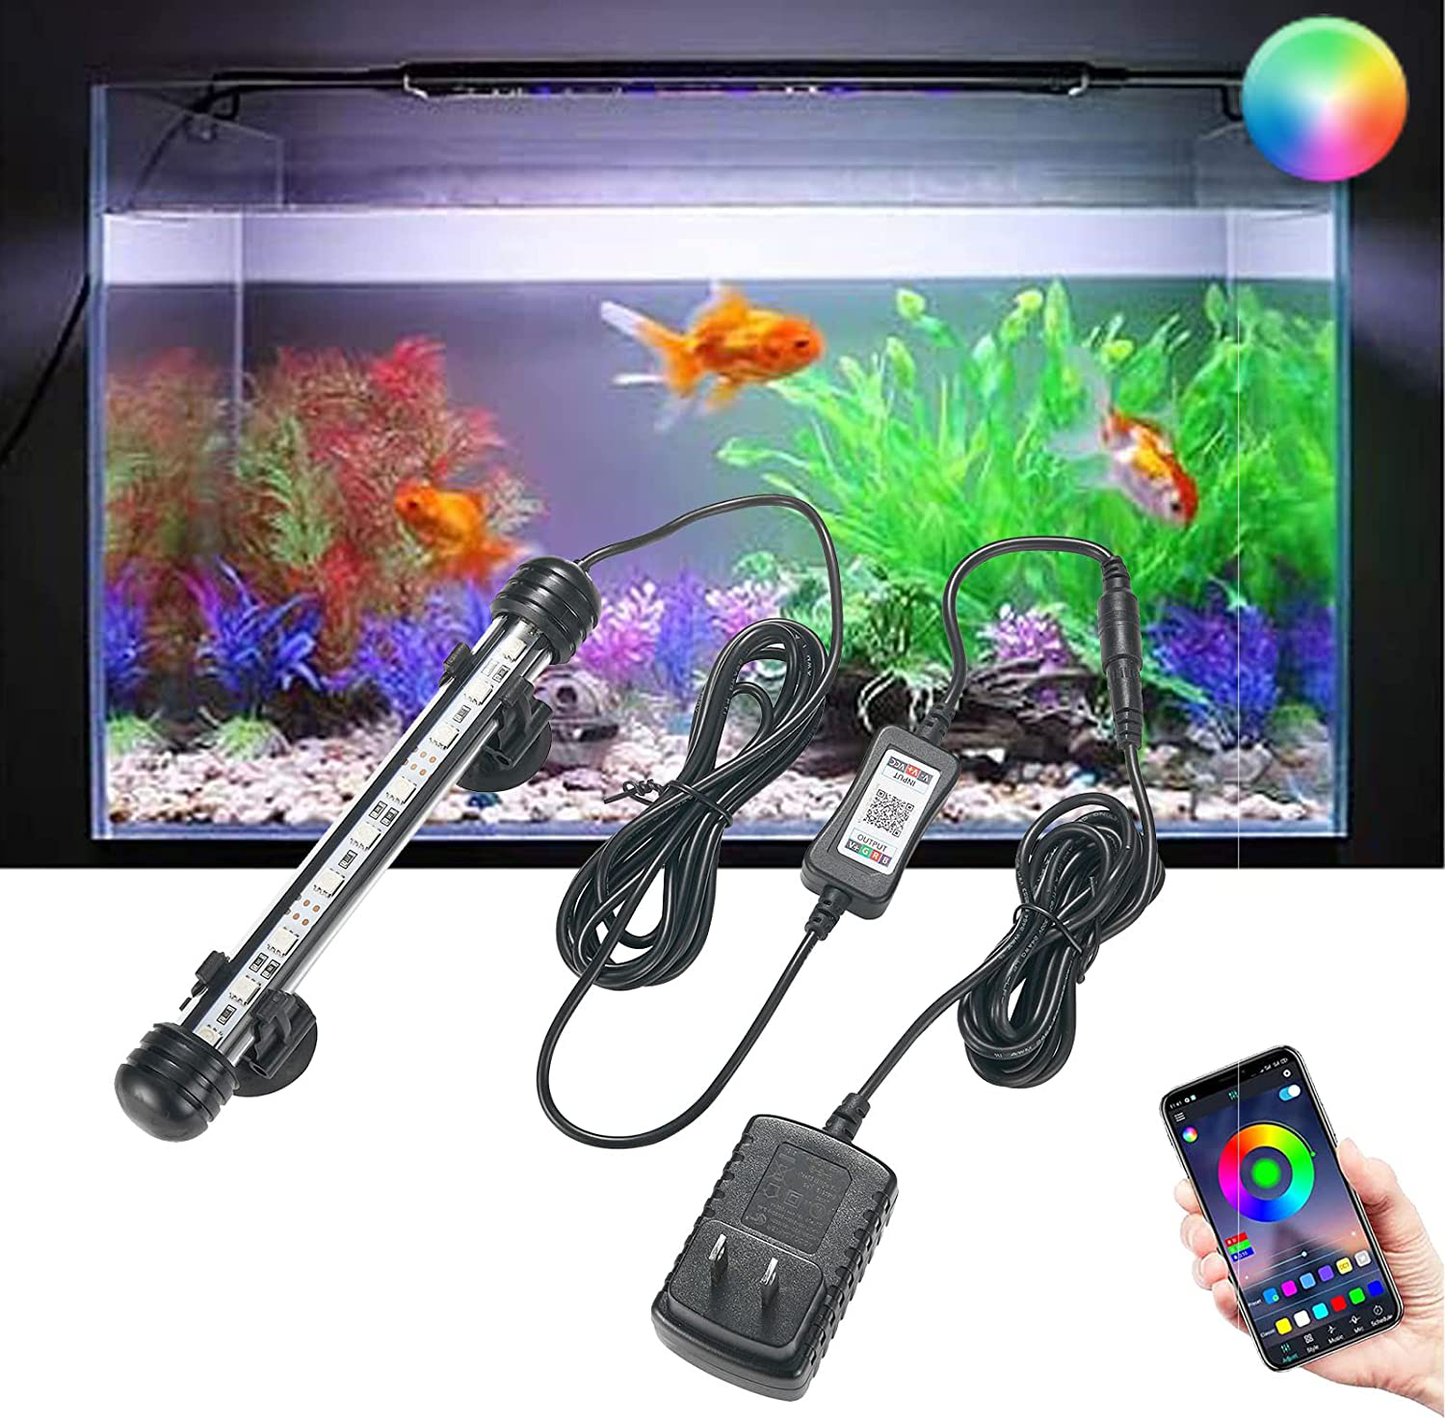 DOCEAN Aquarium Lighting Fish Tank Light with APP Control, RGB Color Changing, with Timer 15 Leds, 11 Inch/28Cm